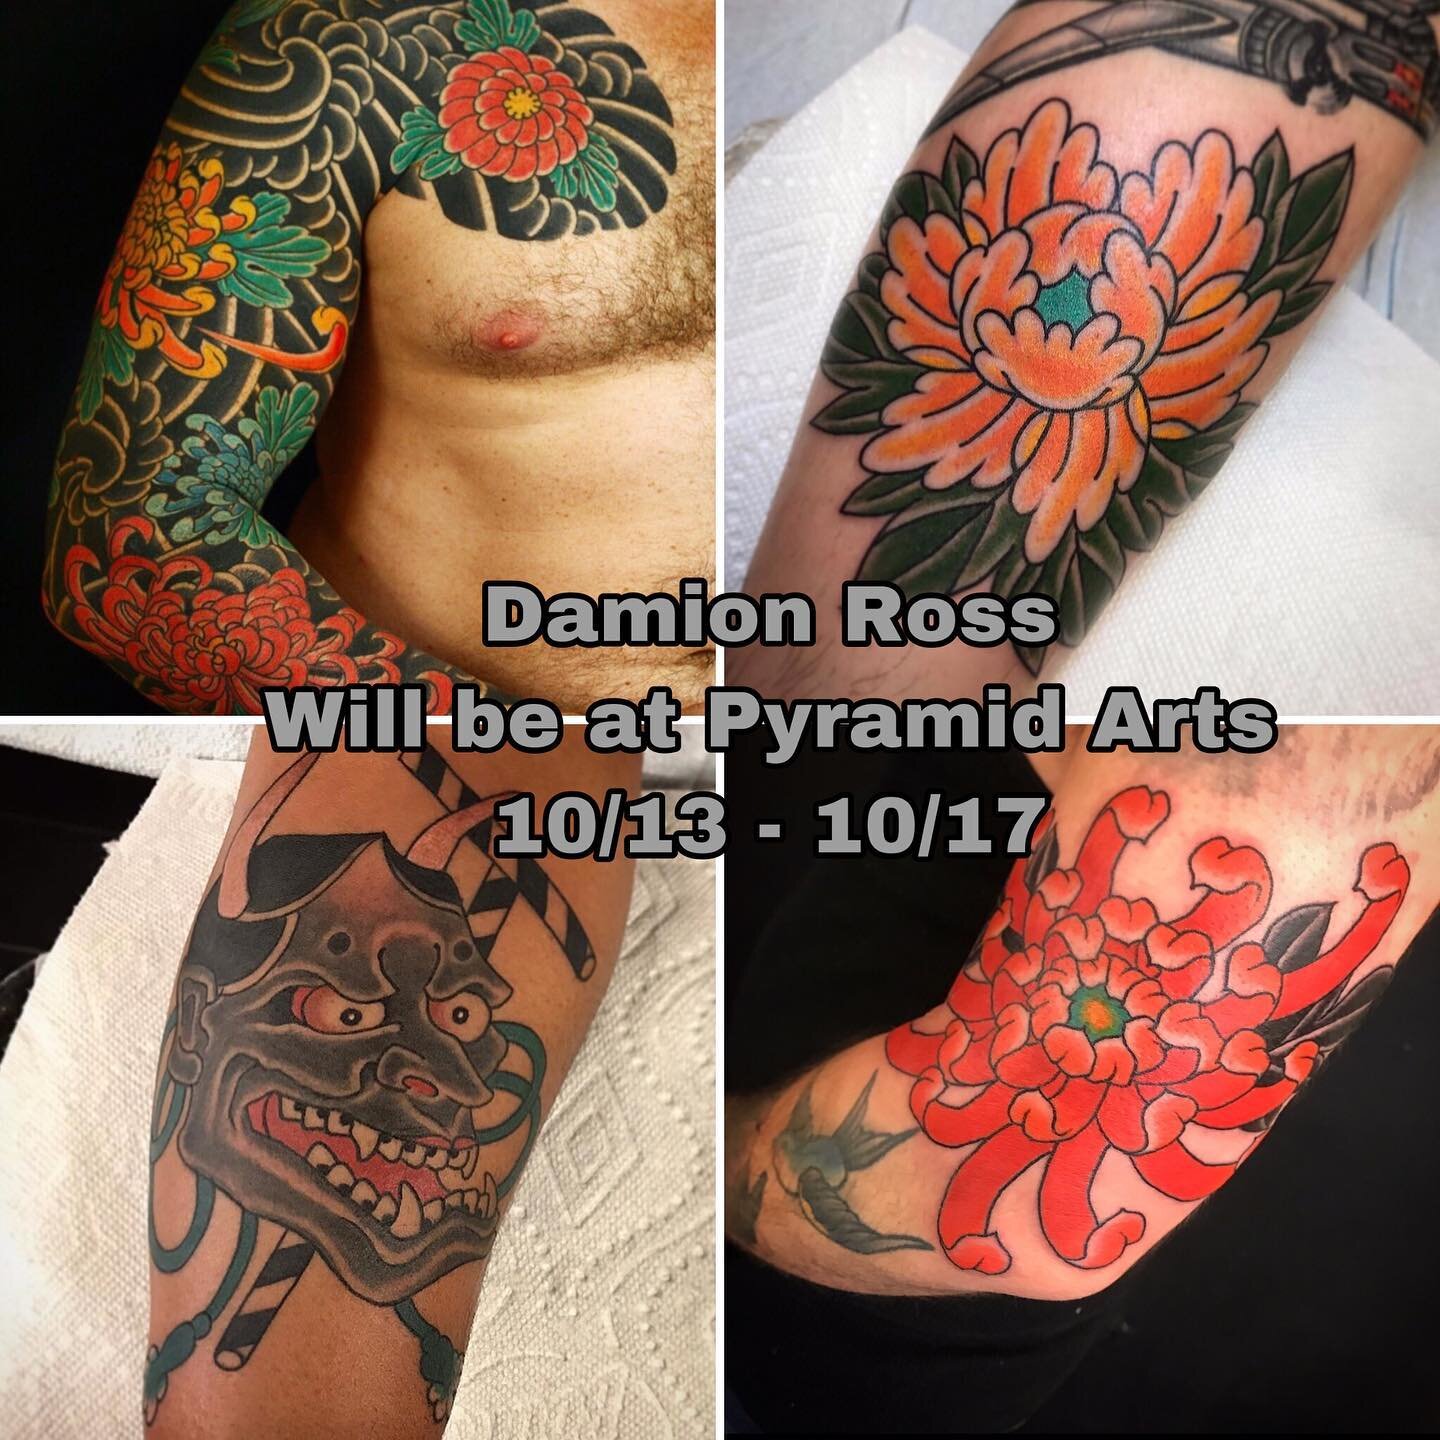 Don&rsquo;t sleep on this! @damionross will be HERE at PYRAMID ARTS TATTOO from Tuesday 10/13- Saturday 10/17 !! Email to book! Only a few spots left!!! Pyramidartstattoo@gmail.com